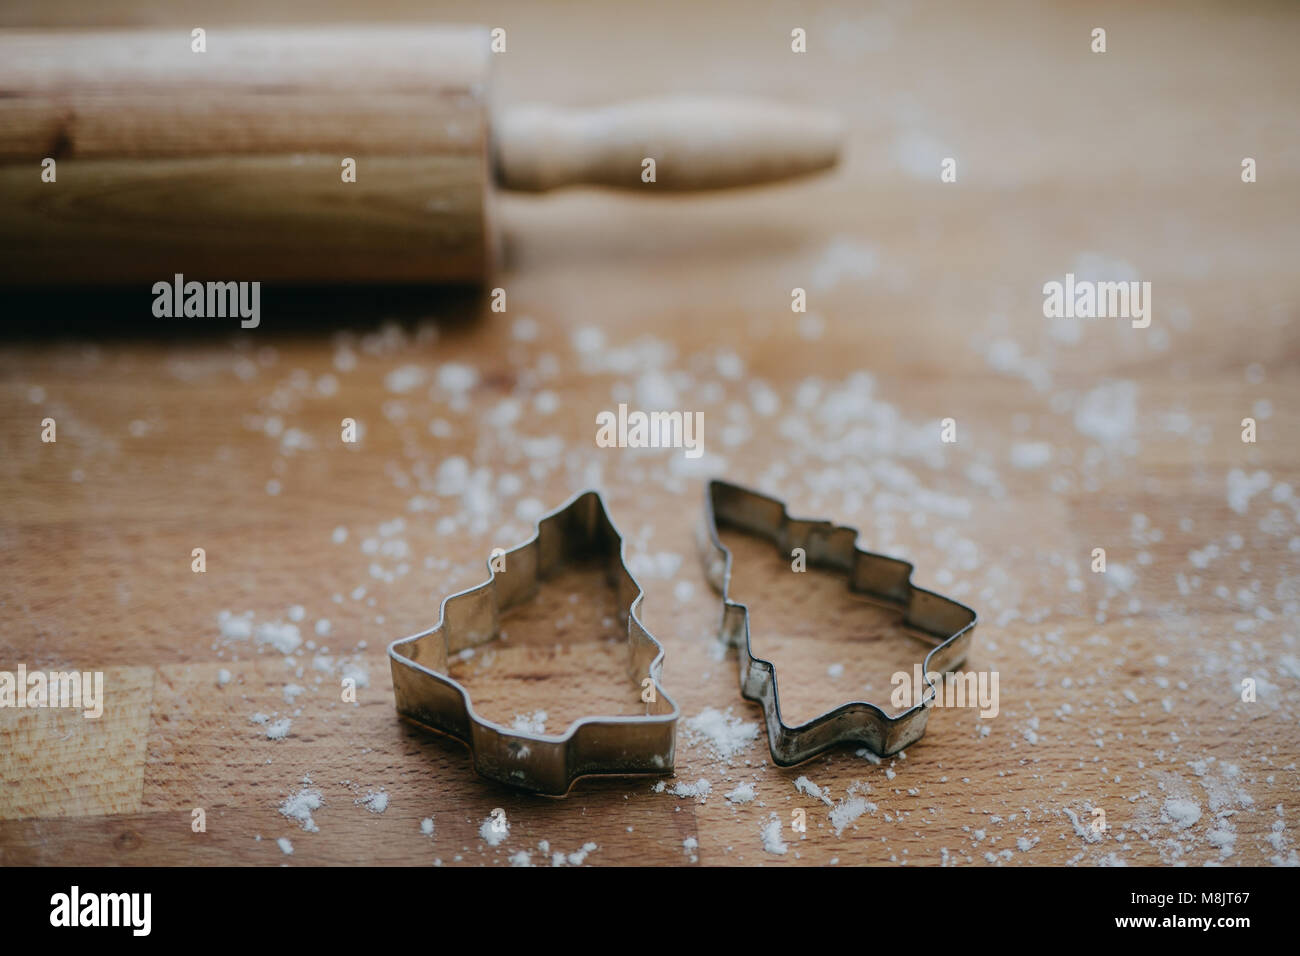 Baking gingerbread cookies for Christmas Stock Photo